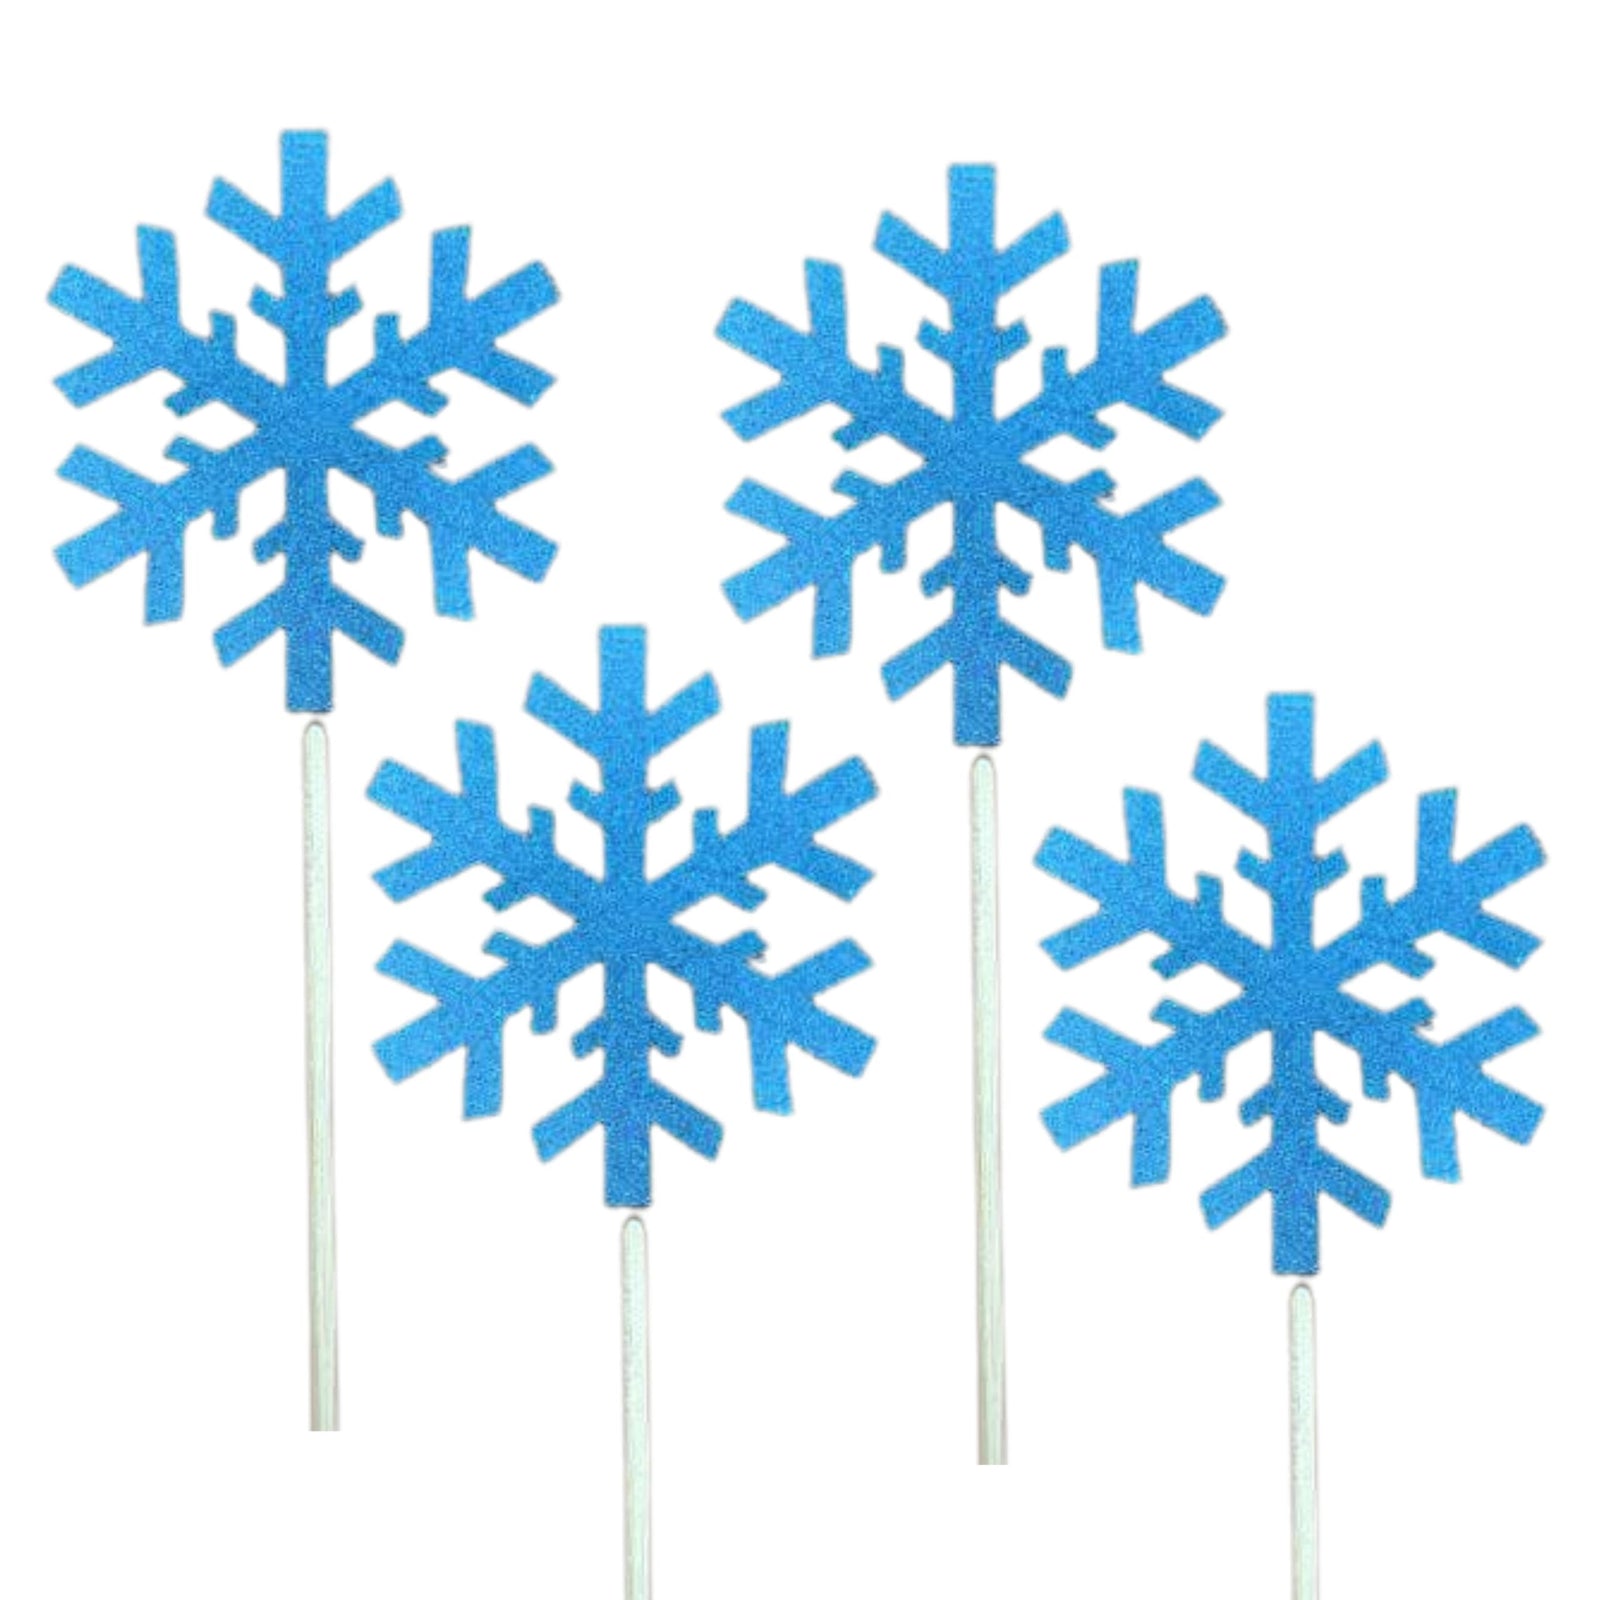 20 Pcs Silver &amp; Light Blue Cardstock Cake &amp; Cupcake Toppers for Christmas &amp; Frozen Princess Birthday Themes